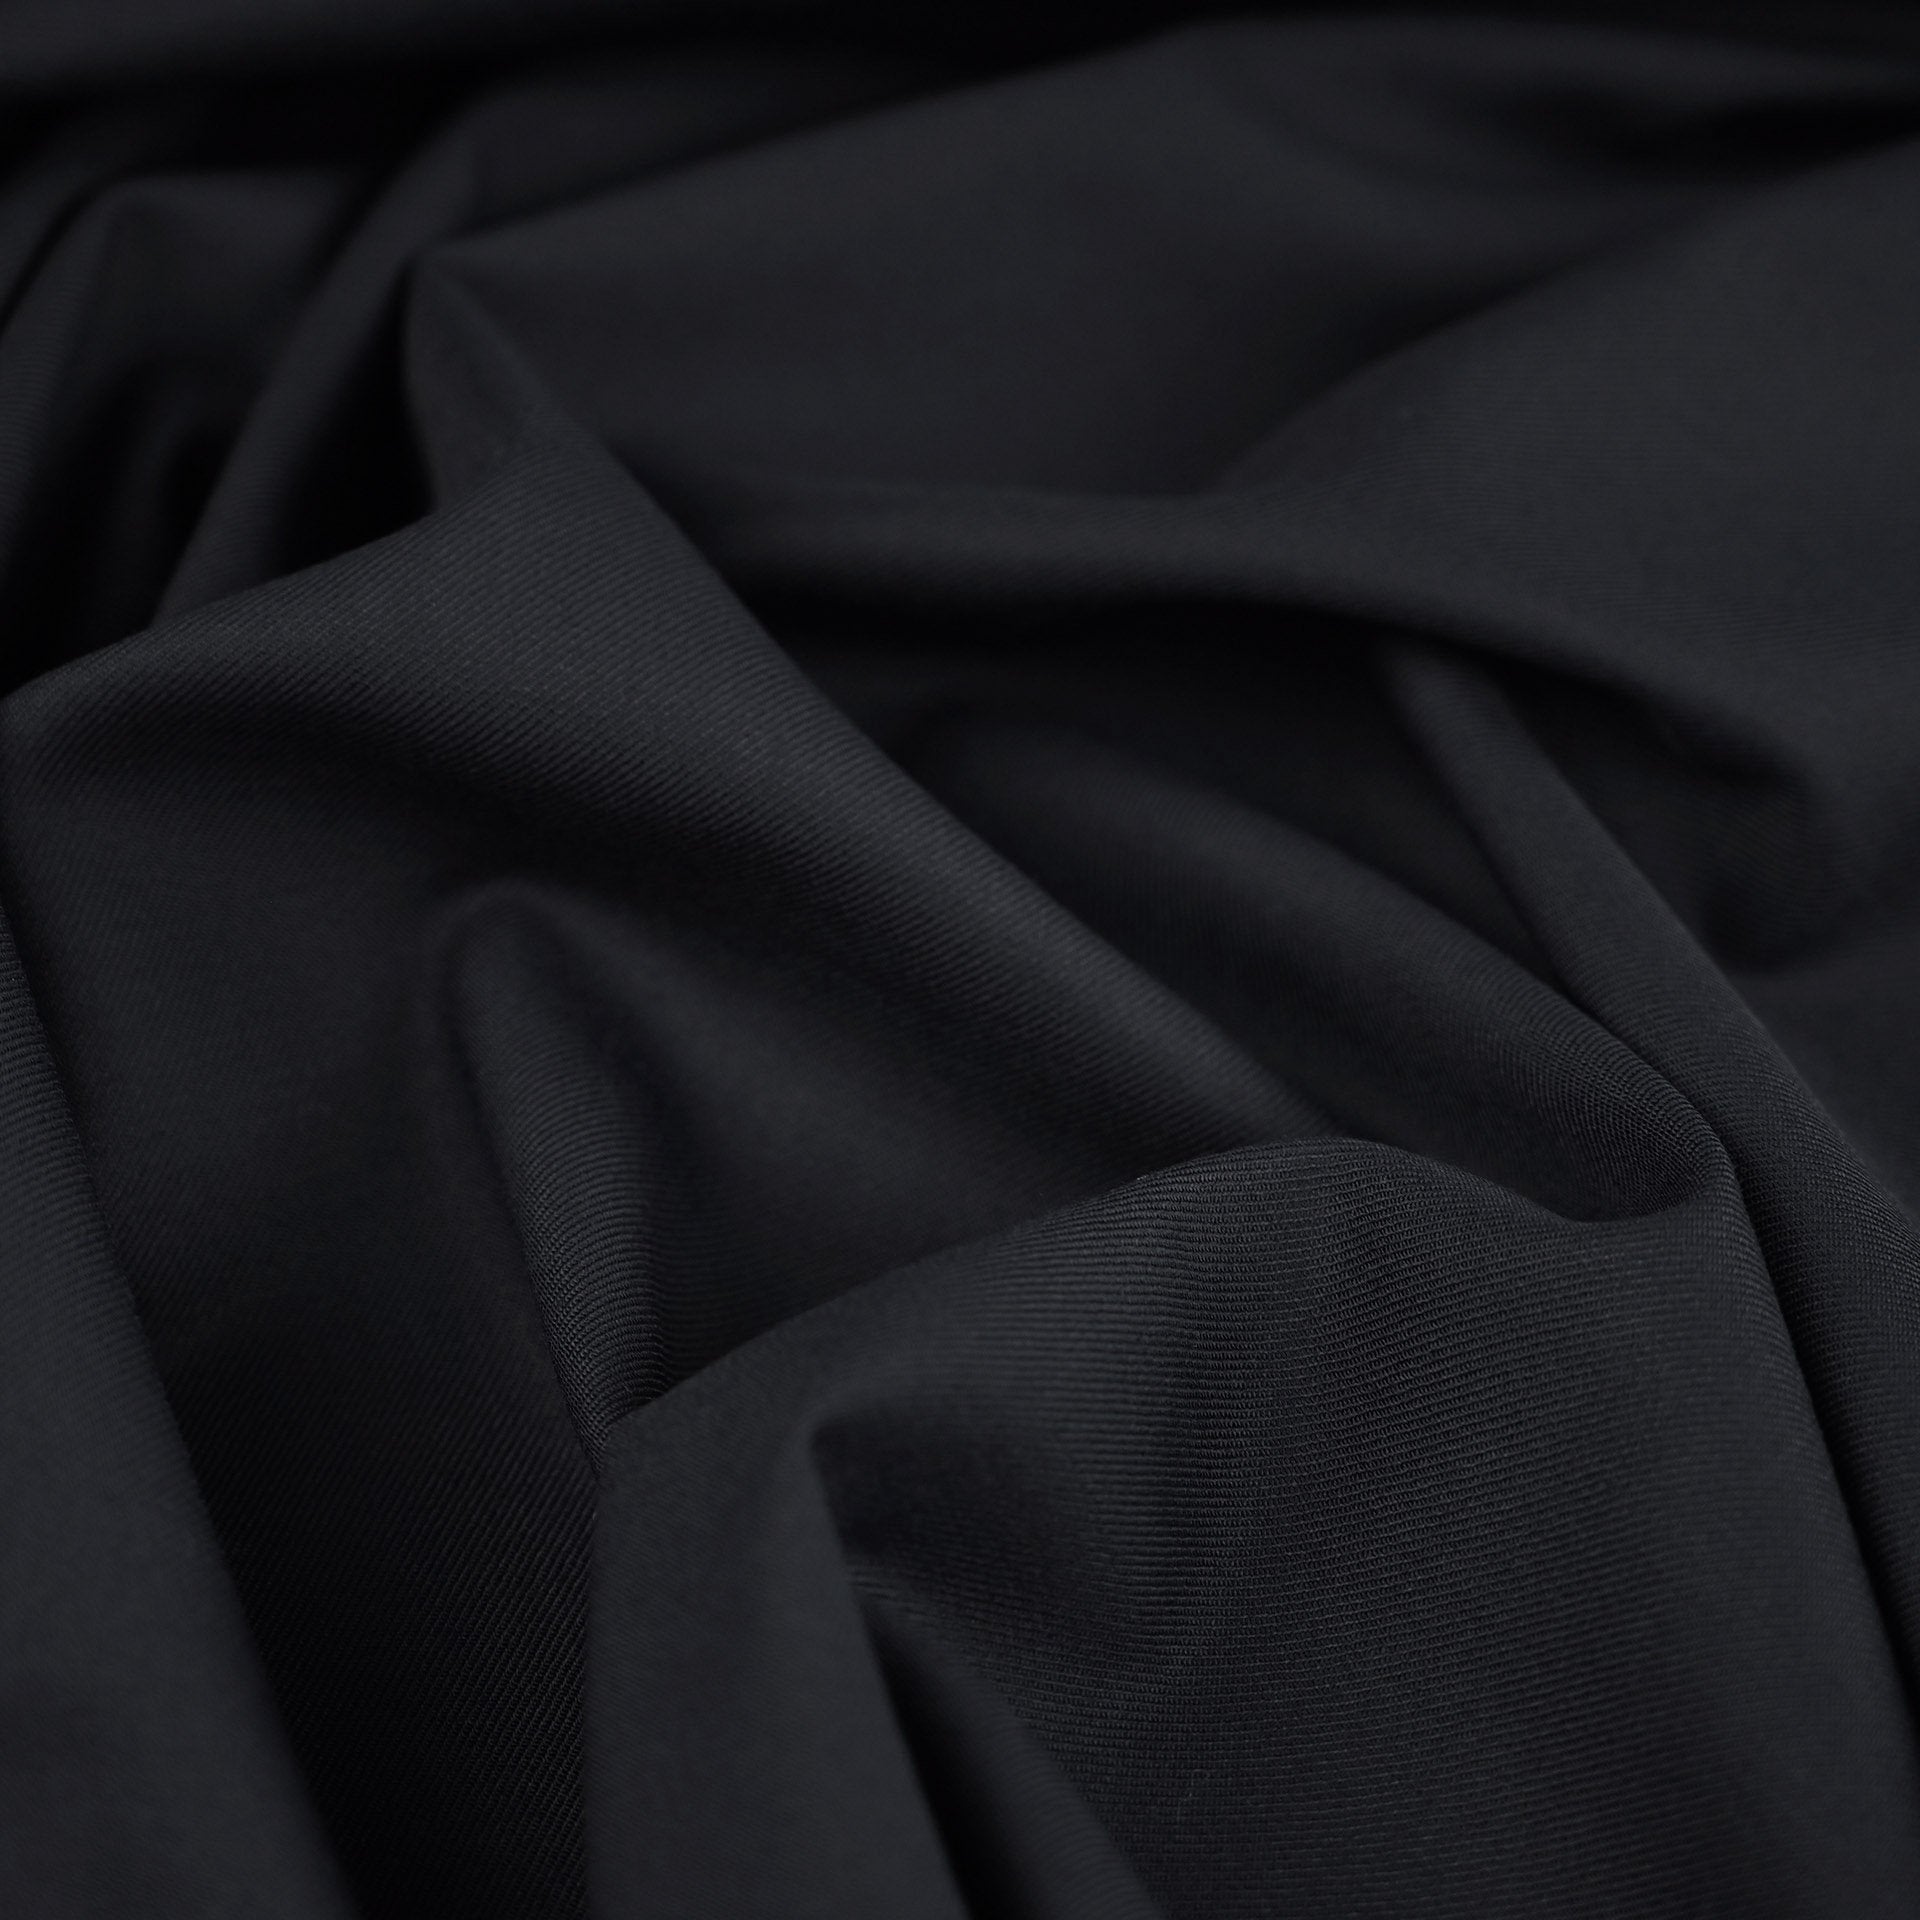 Navy Suiting Fabric 4419